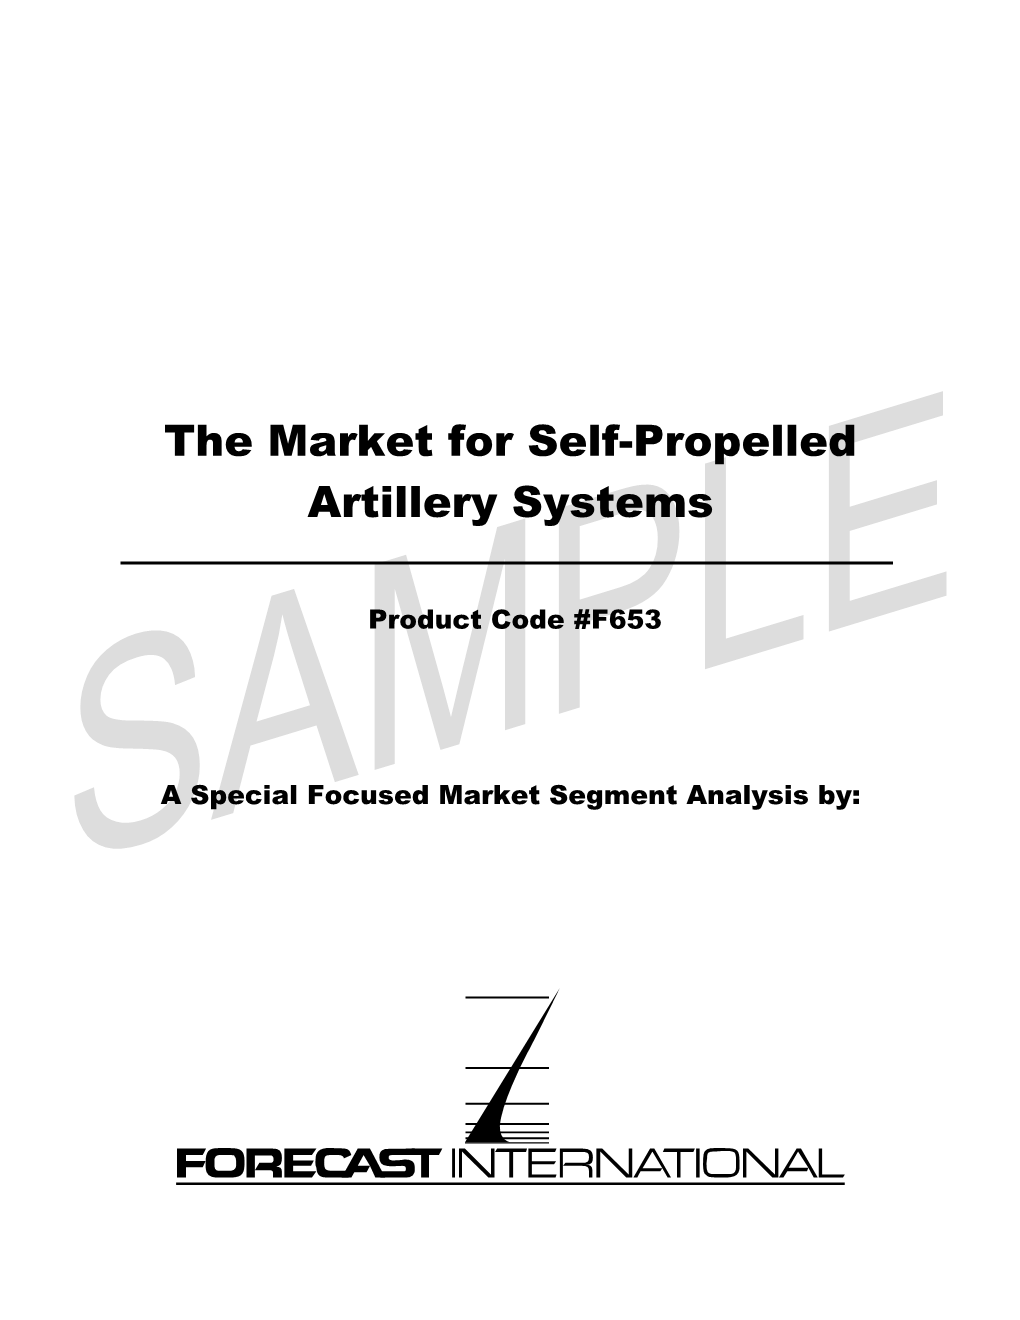 The Market for Self-Propelled Artillery Systems